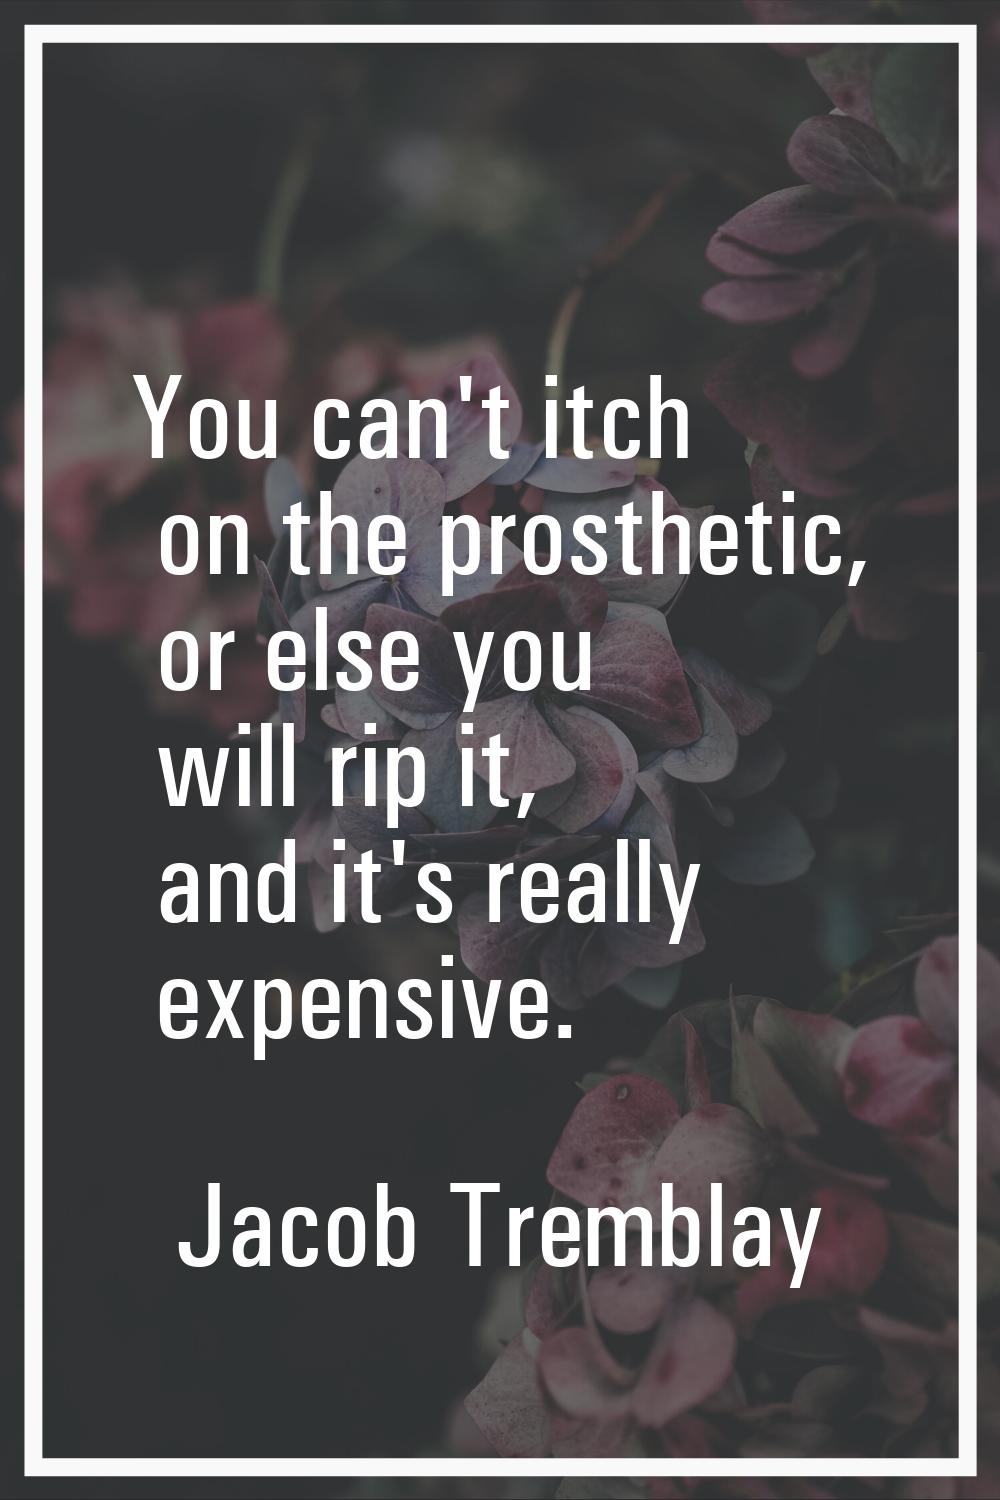 You can't itch on the prosthetic, or else you will rip it, and it's really expensive.